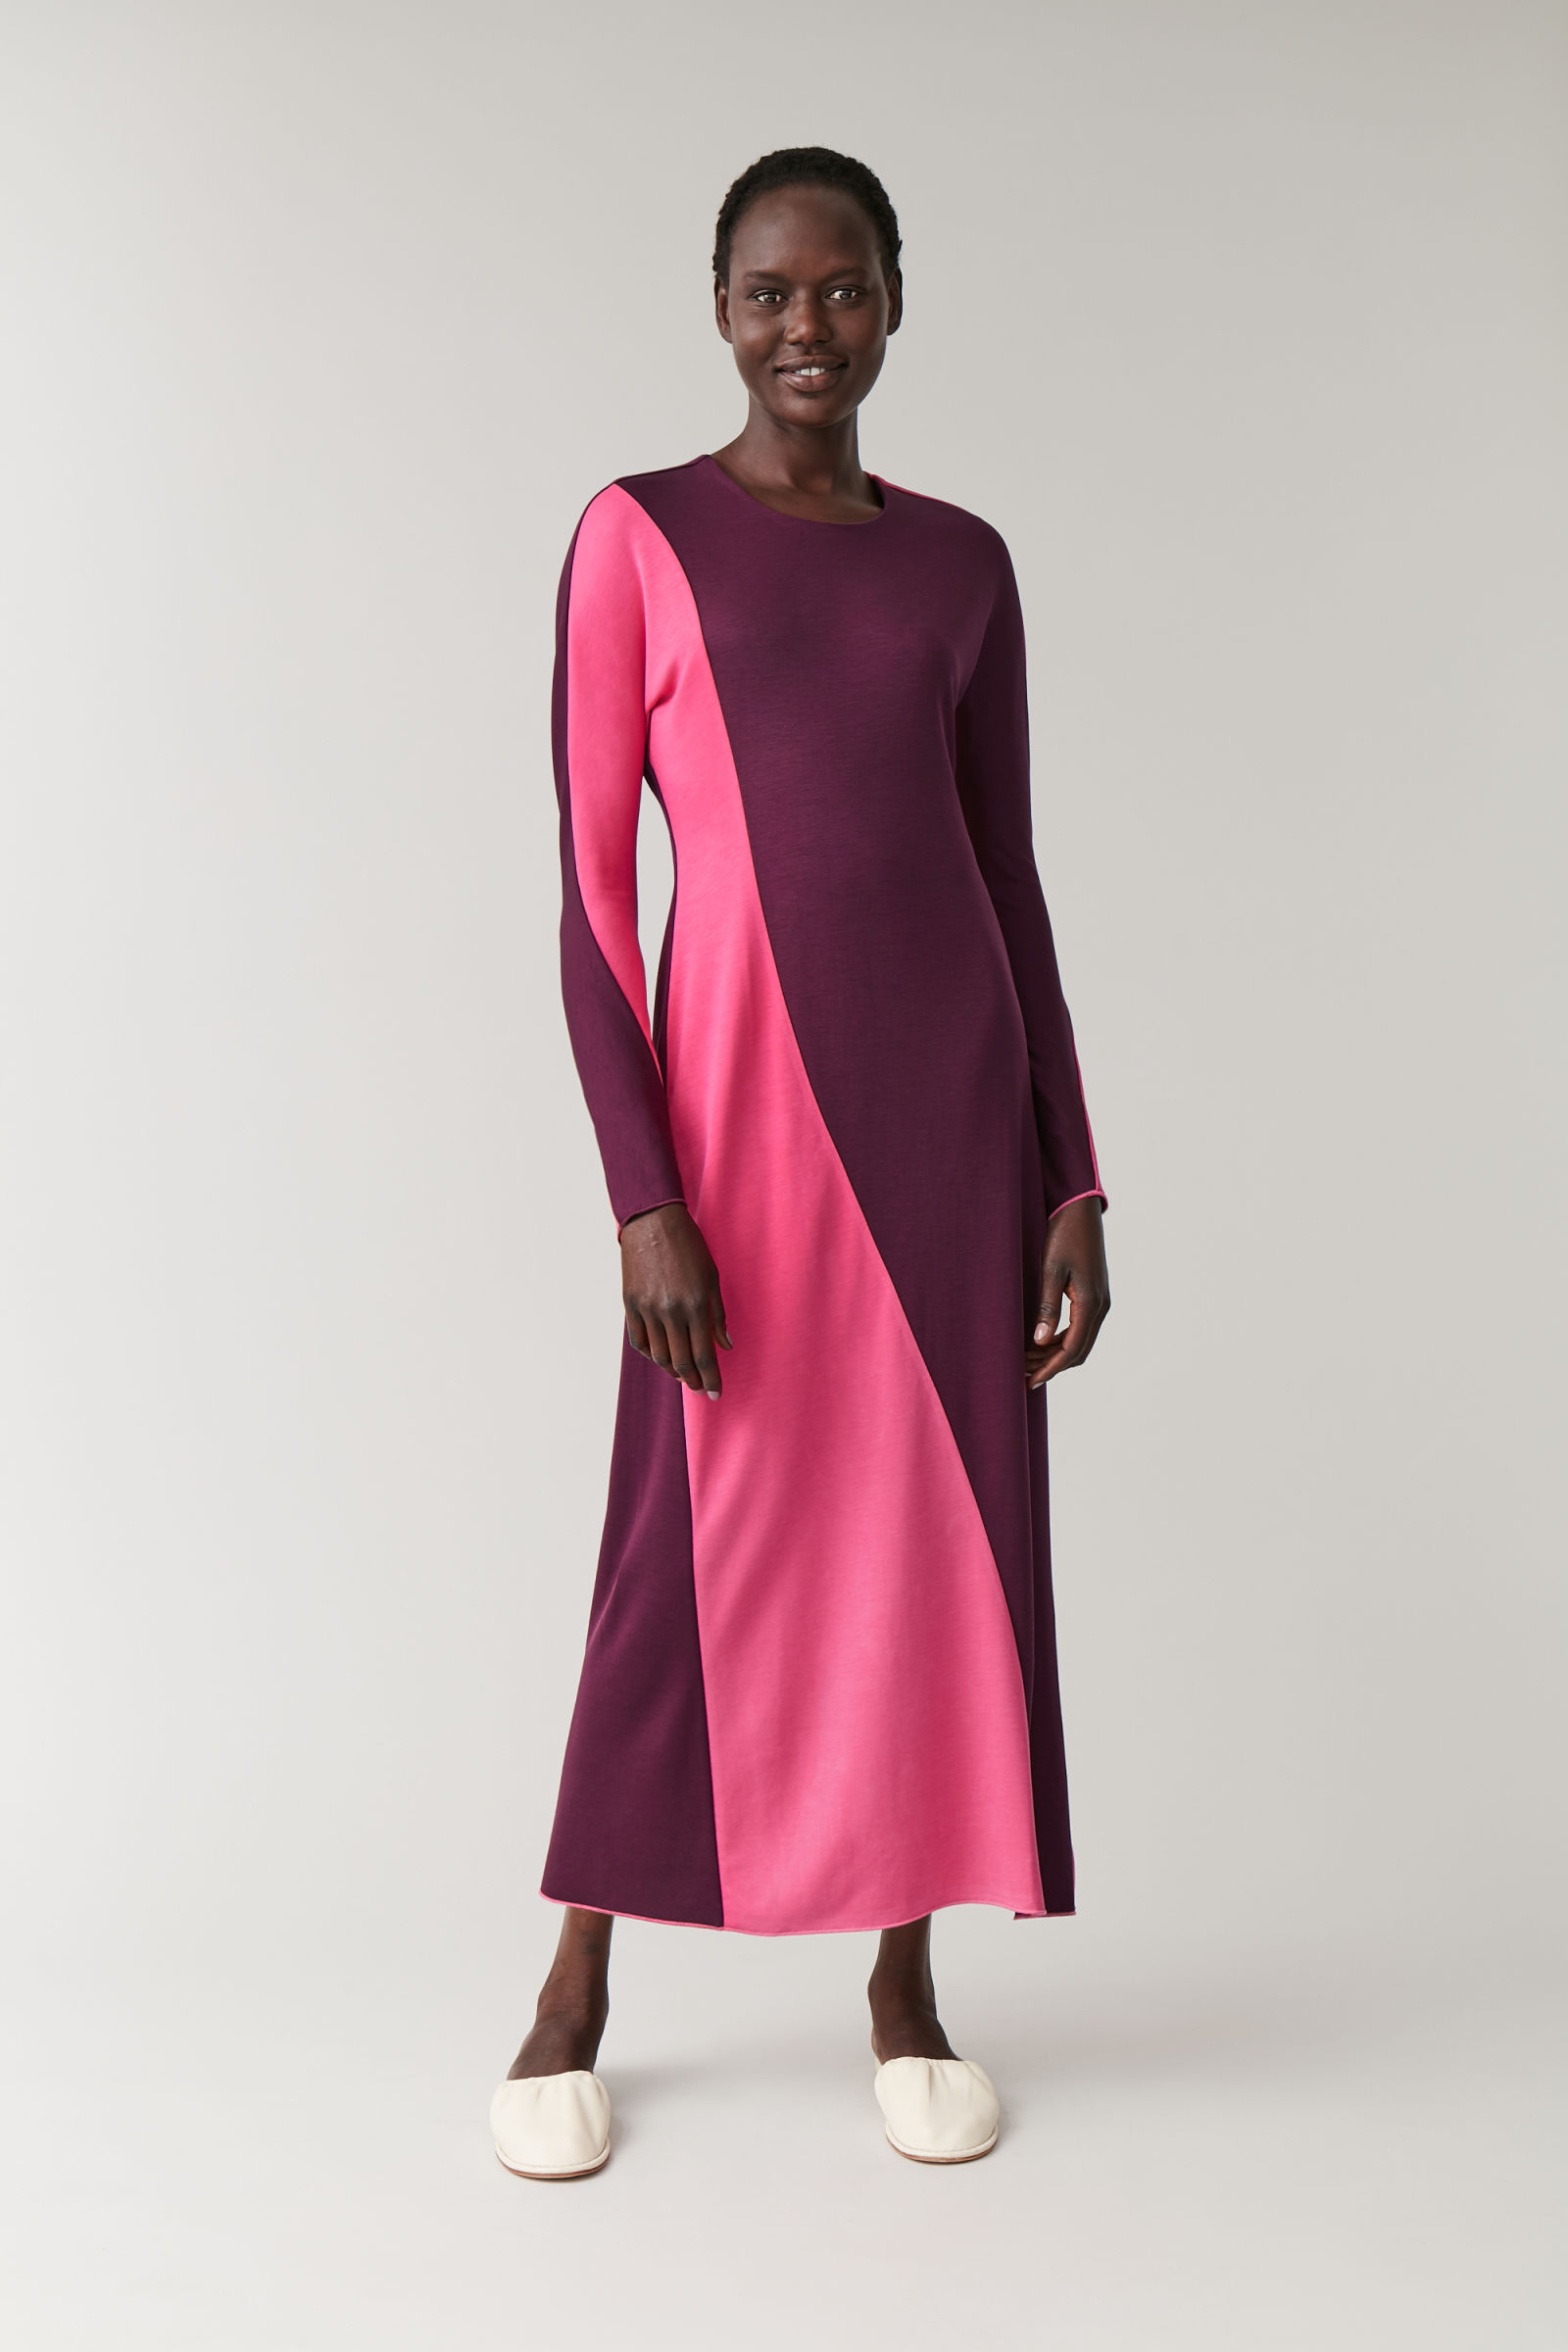 Two-Tone Dresses Are Spring's Latest ...